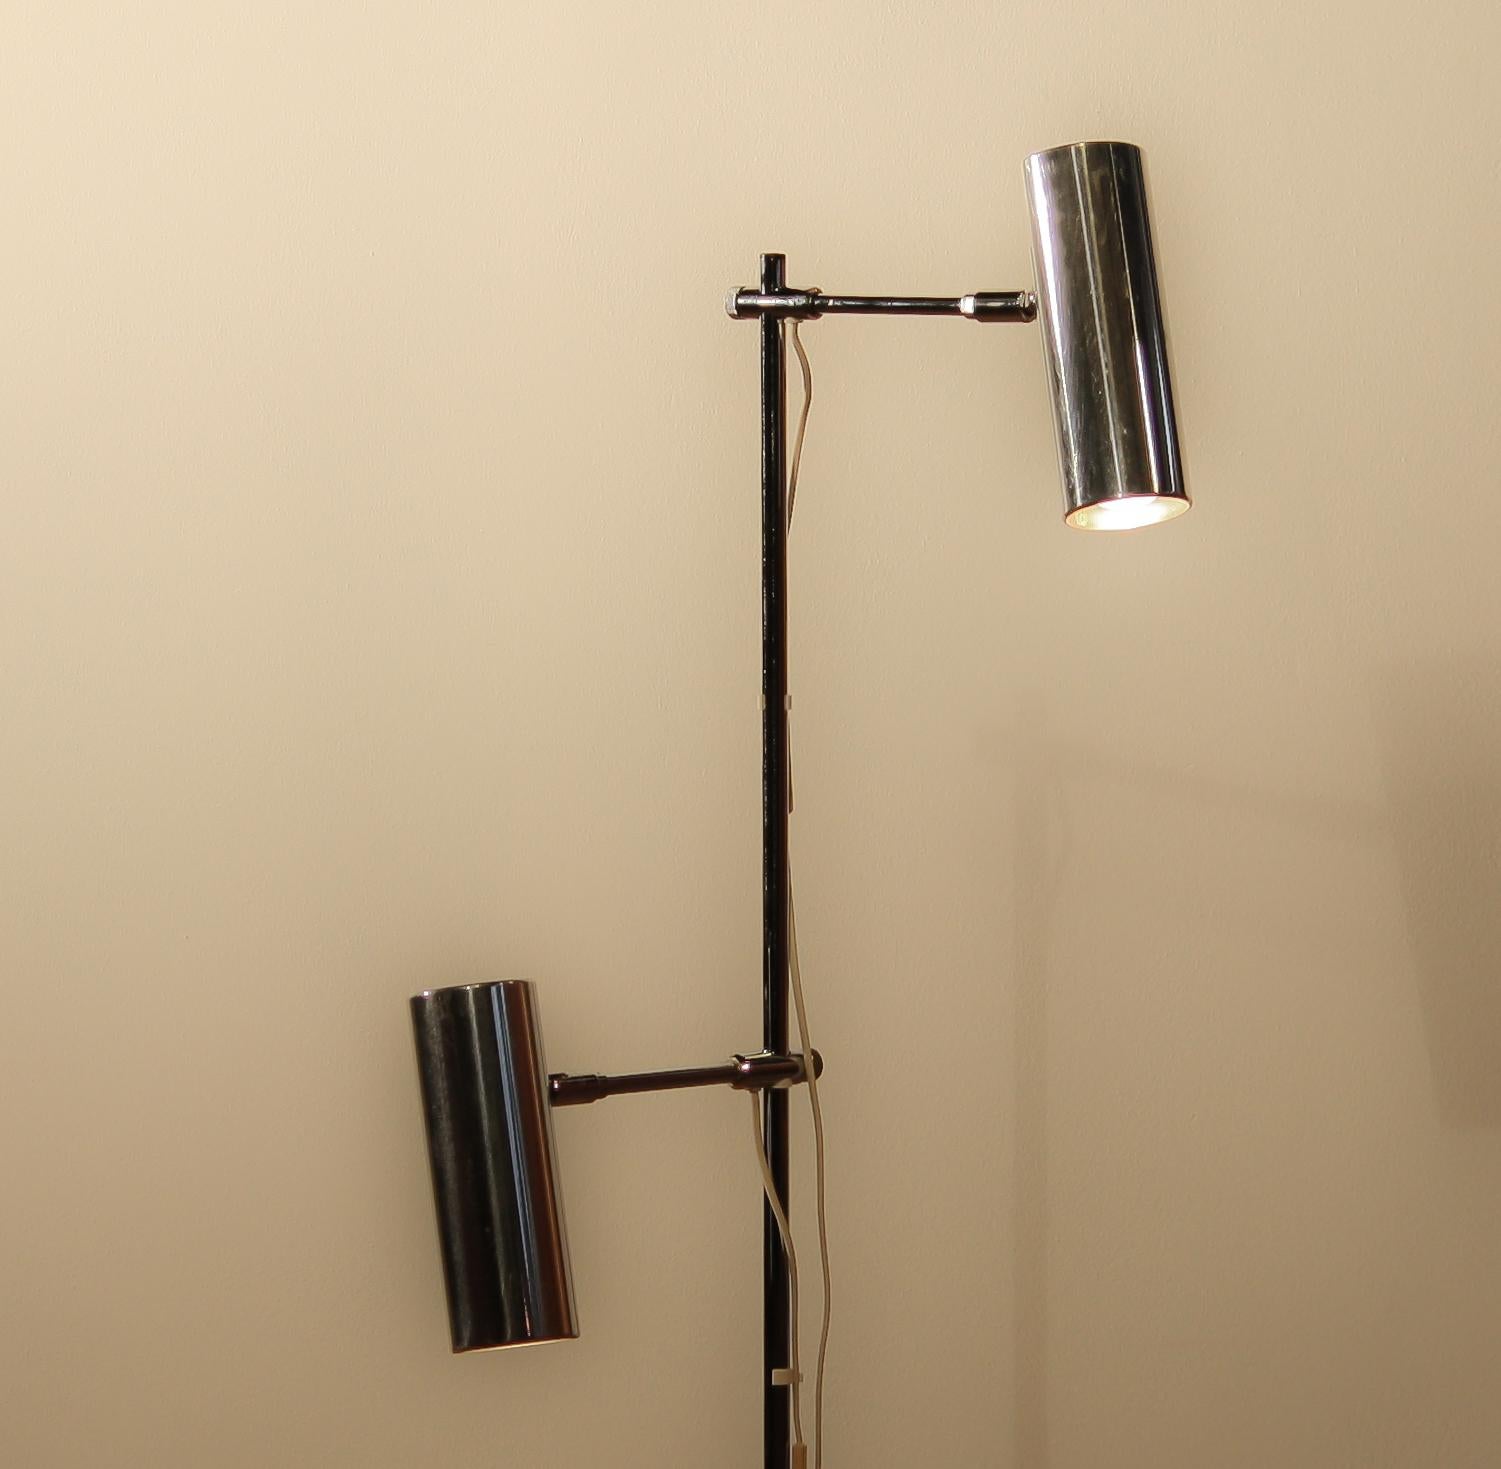 Beautiful floor lamp made by Bergboms Scan light AB Sweden.
This lamp has two lights.
The lampshades are made of aluminium and the stand is made of chromed steel.
It is in a nice working condition.
Period 1960s
Dimensions: H. 112 cm ø 23